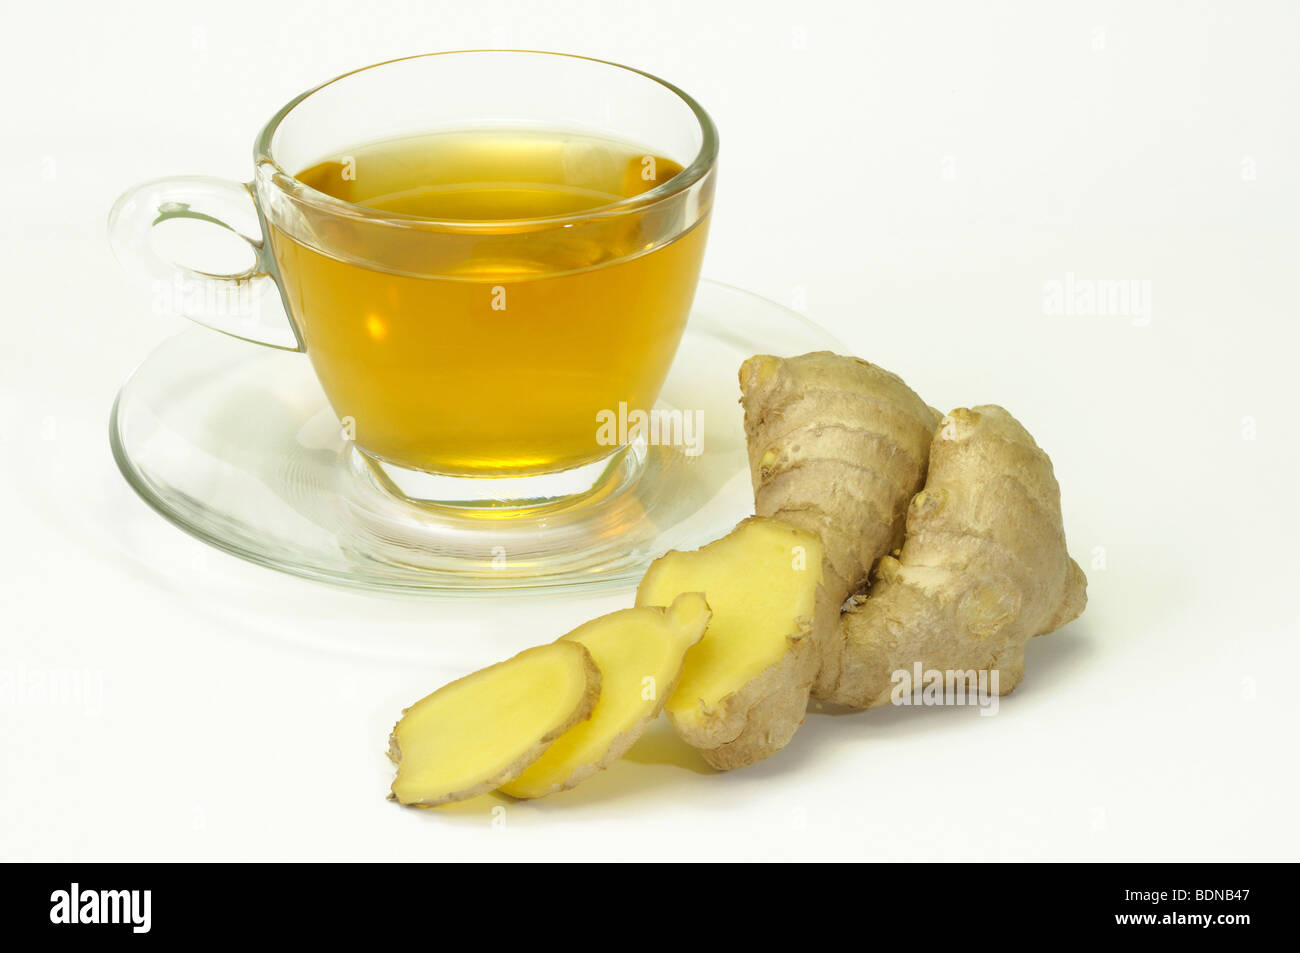 Ginger (Zingiber officinale). A cup of tea with rhizome, studio picture. Stock Photo